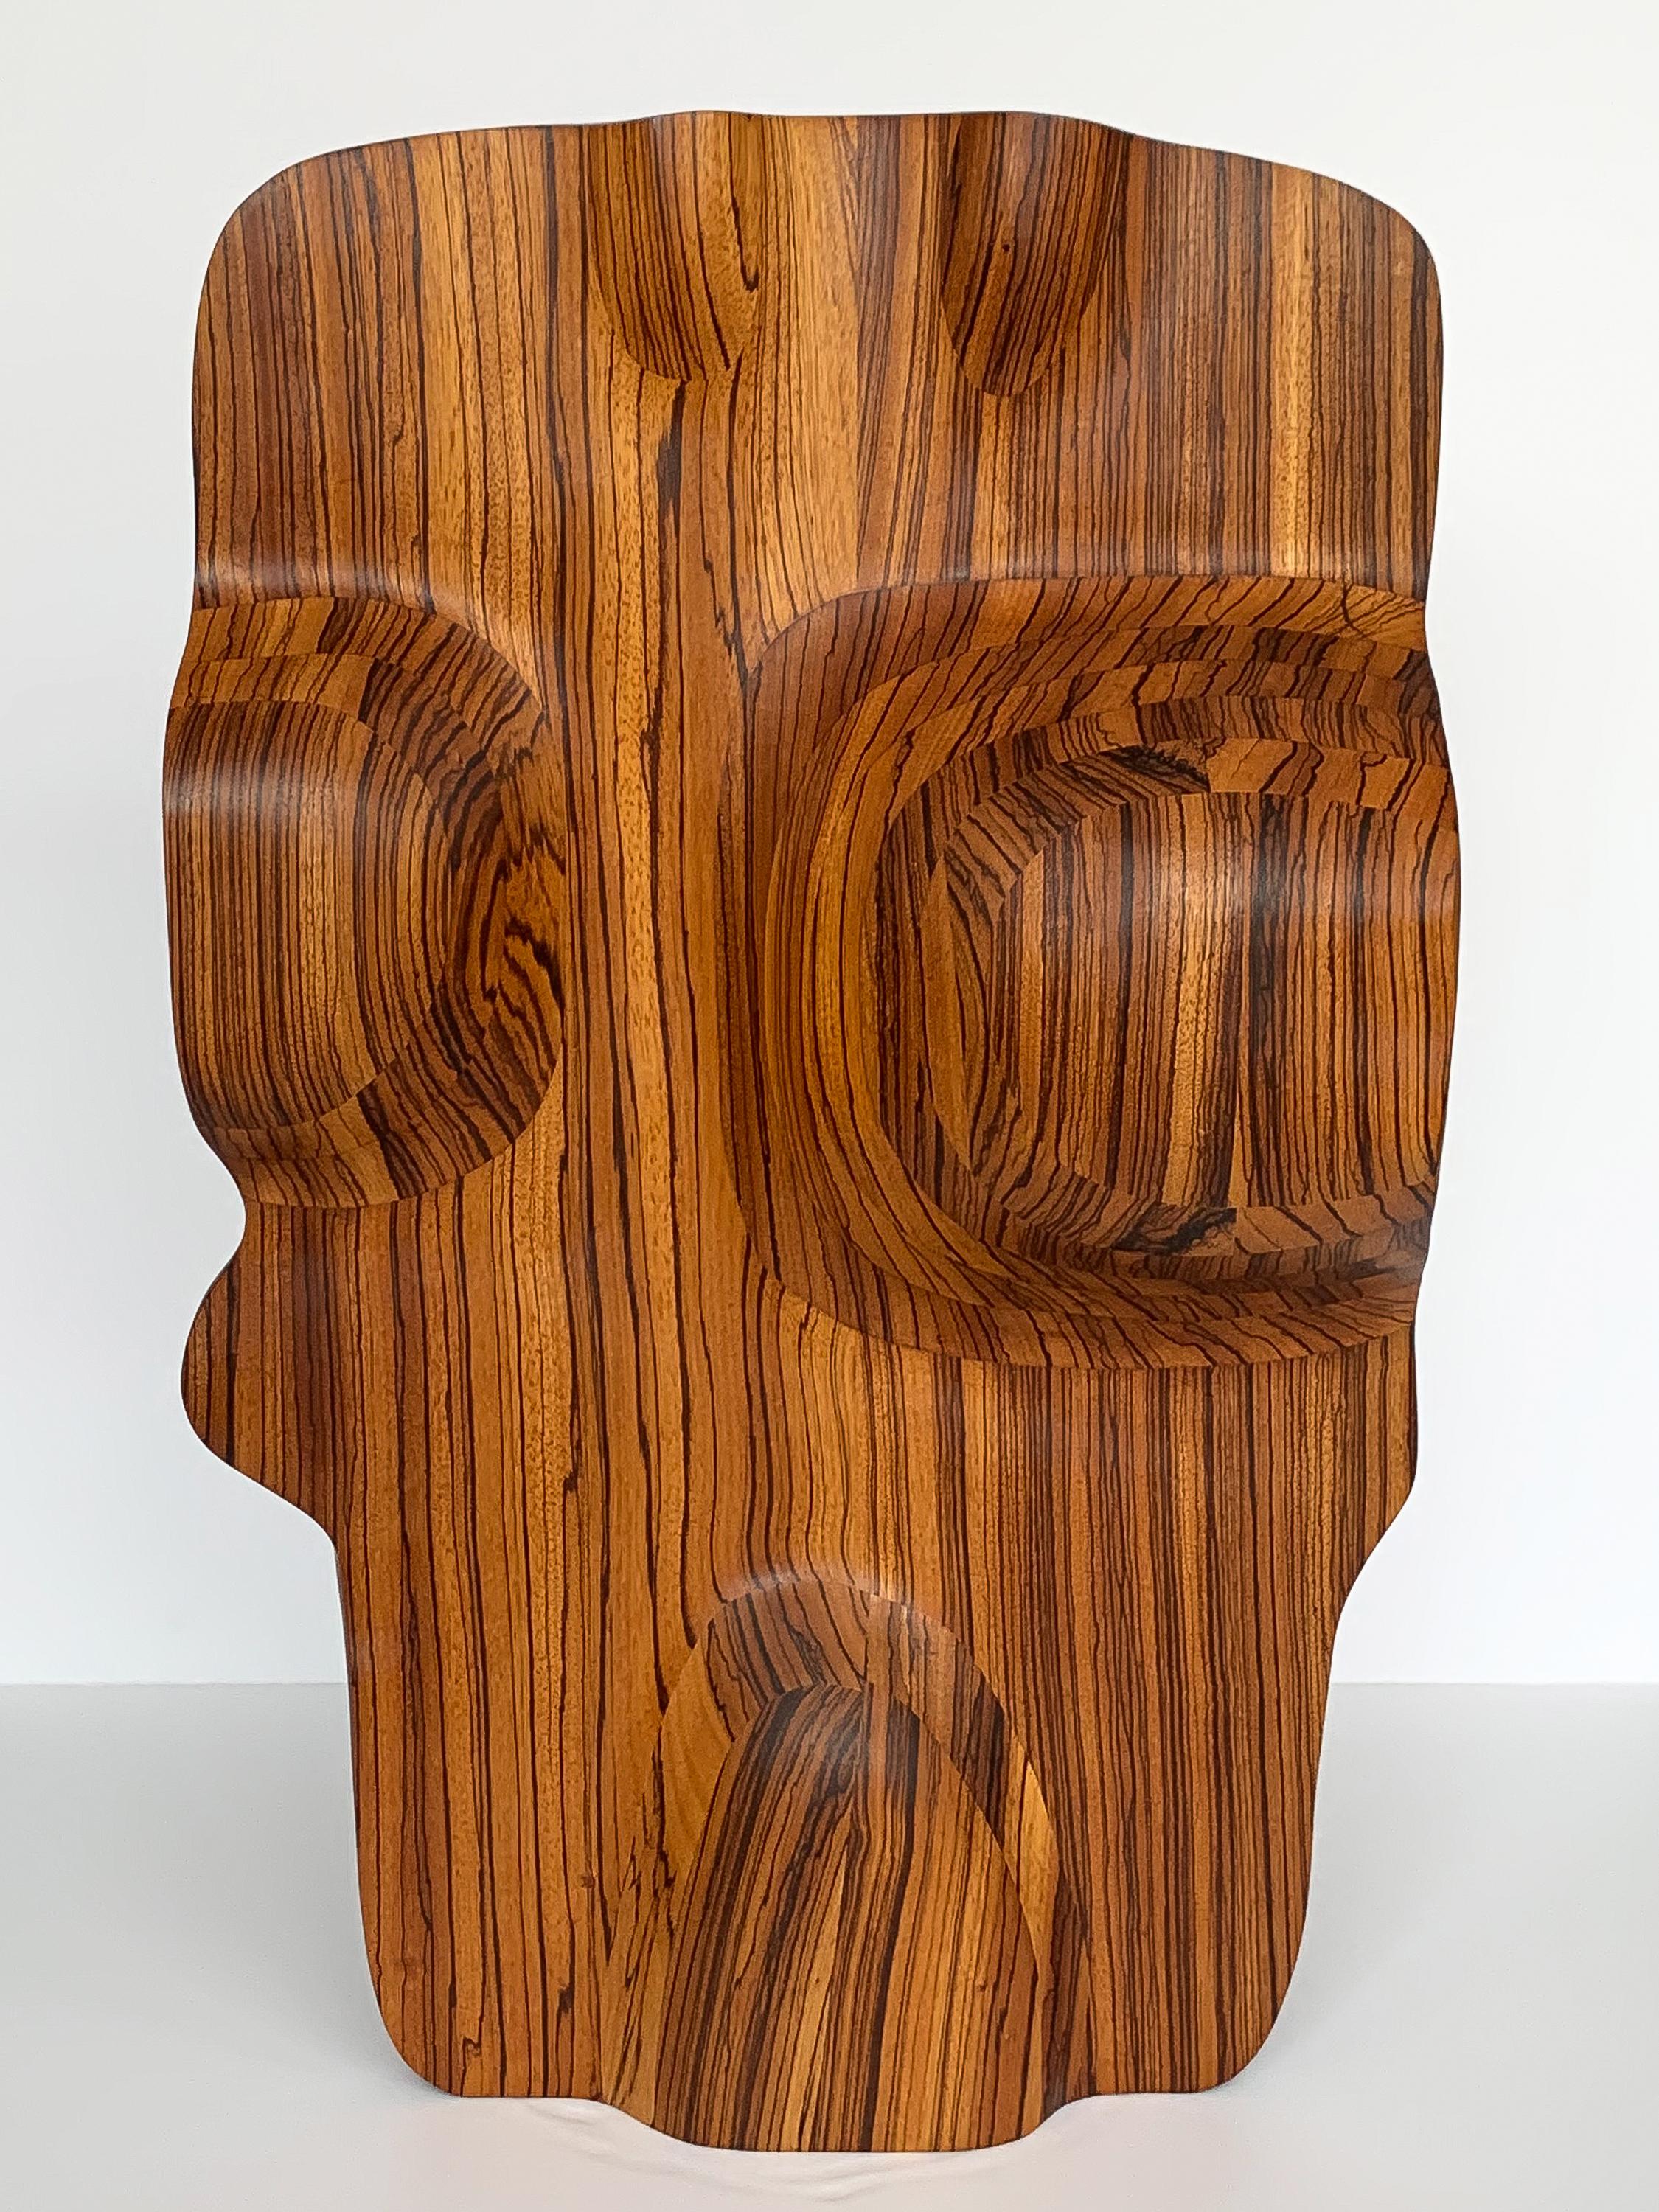 Laminate Monumental Abstract Carved Zebrawood Sculpture by John Campbell